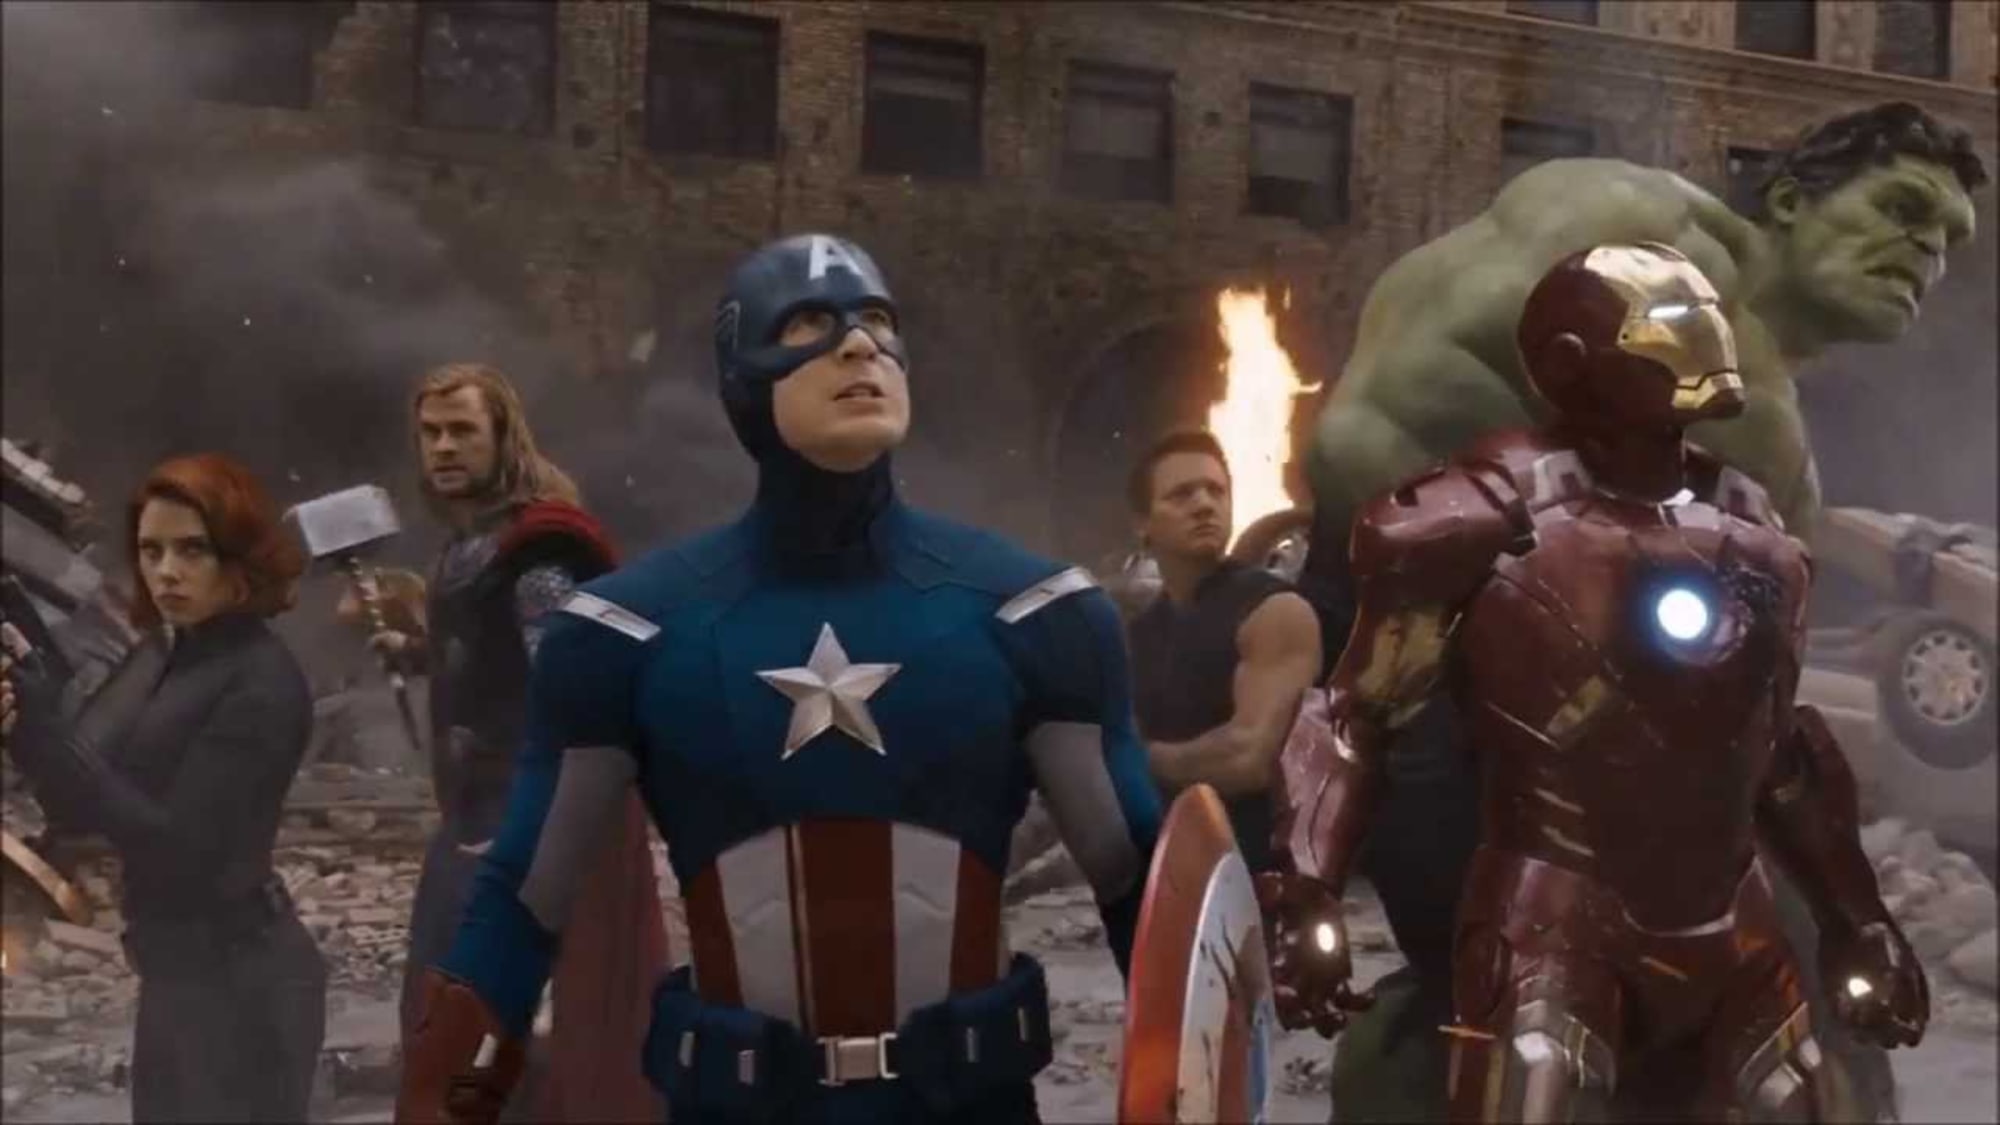 Marvel is apparently considering reuniting the original Avengers